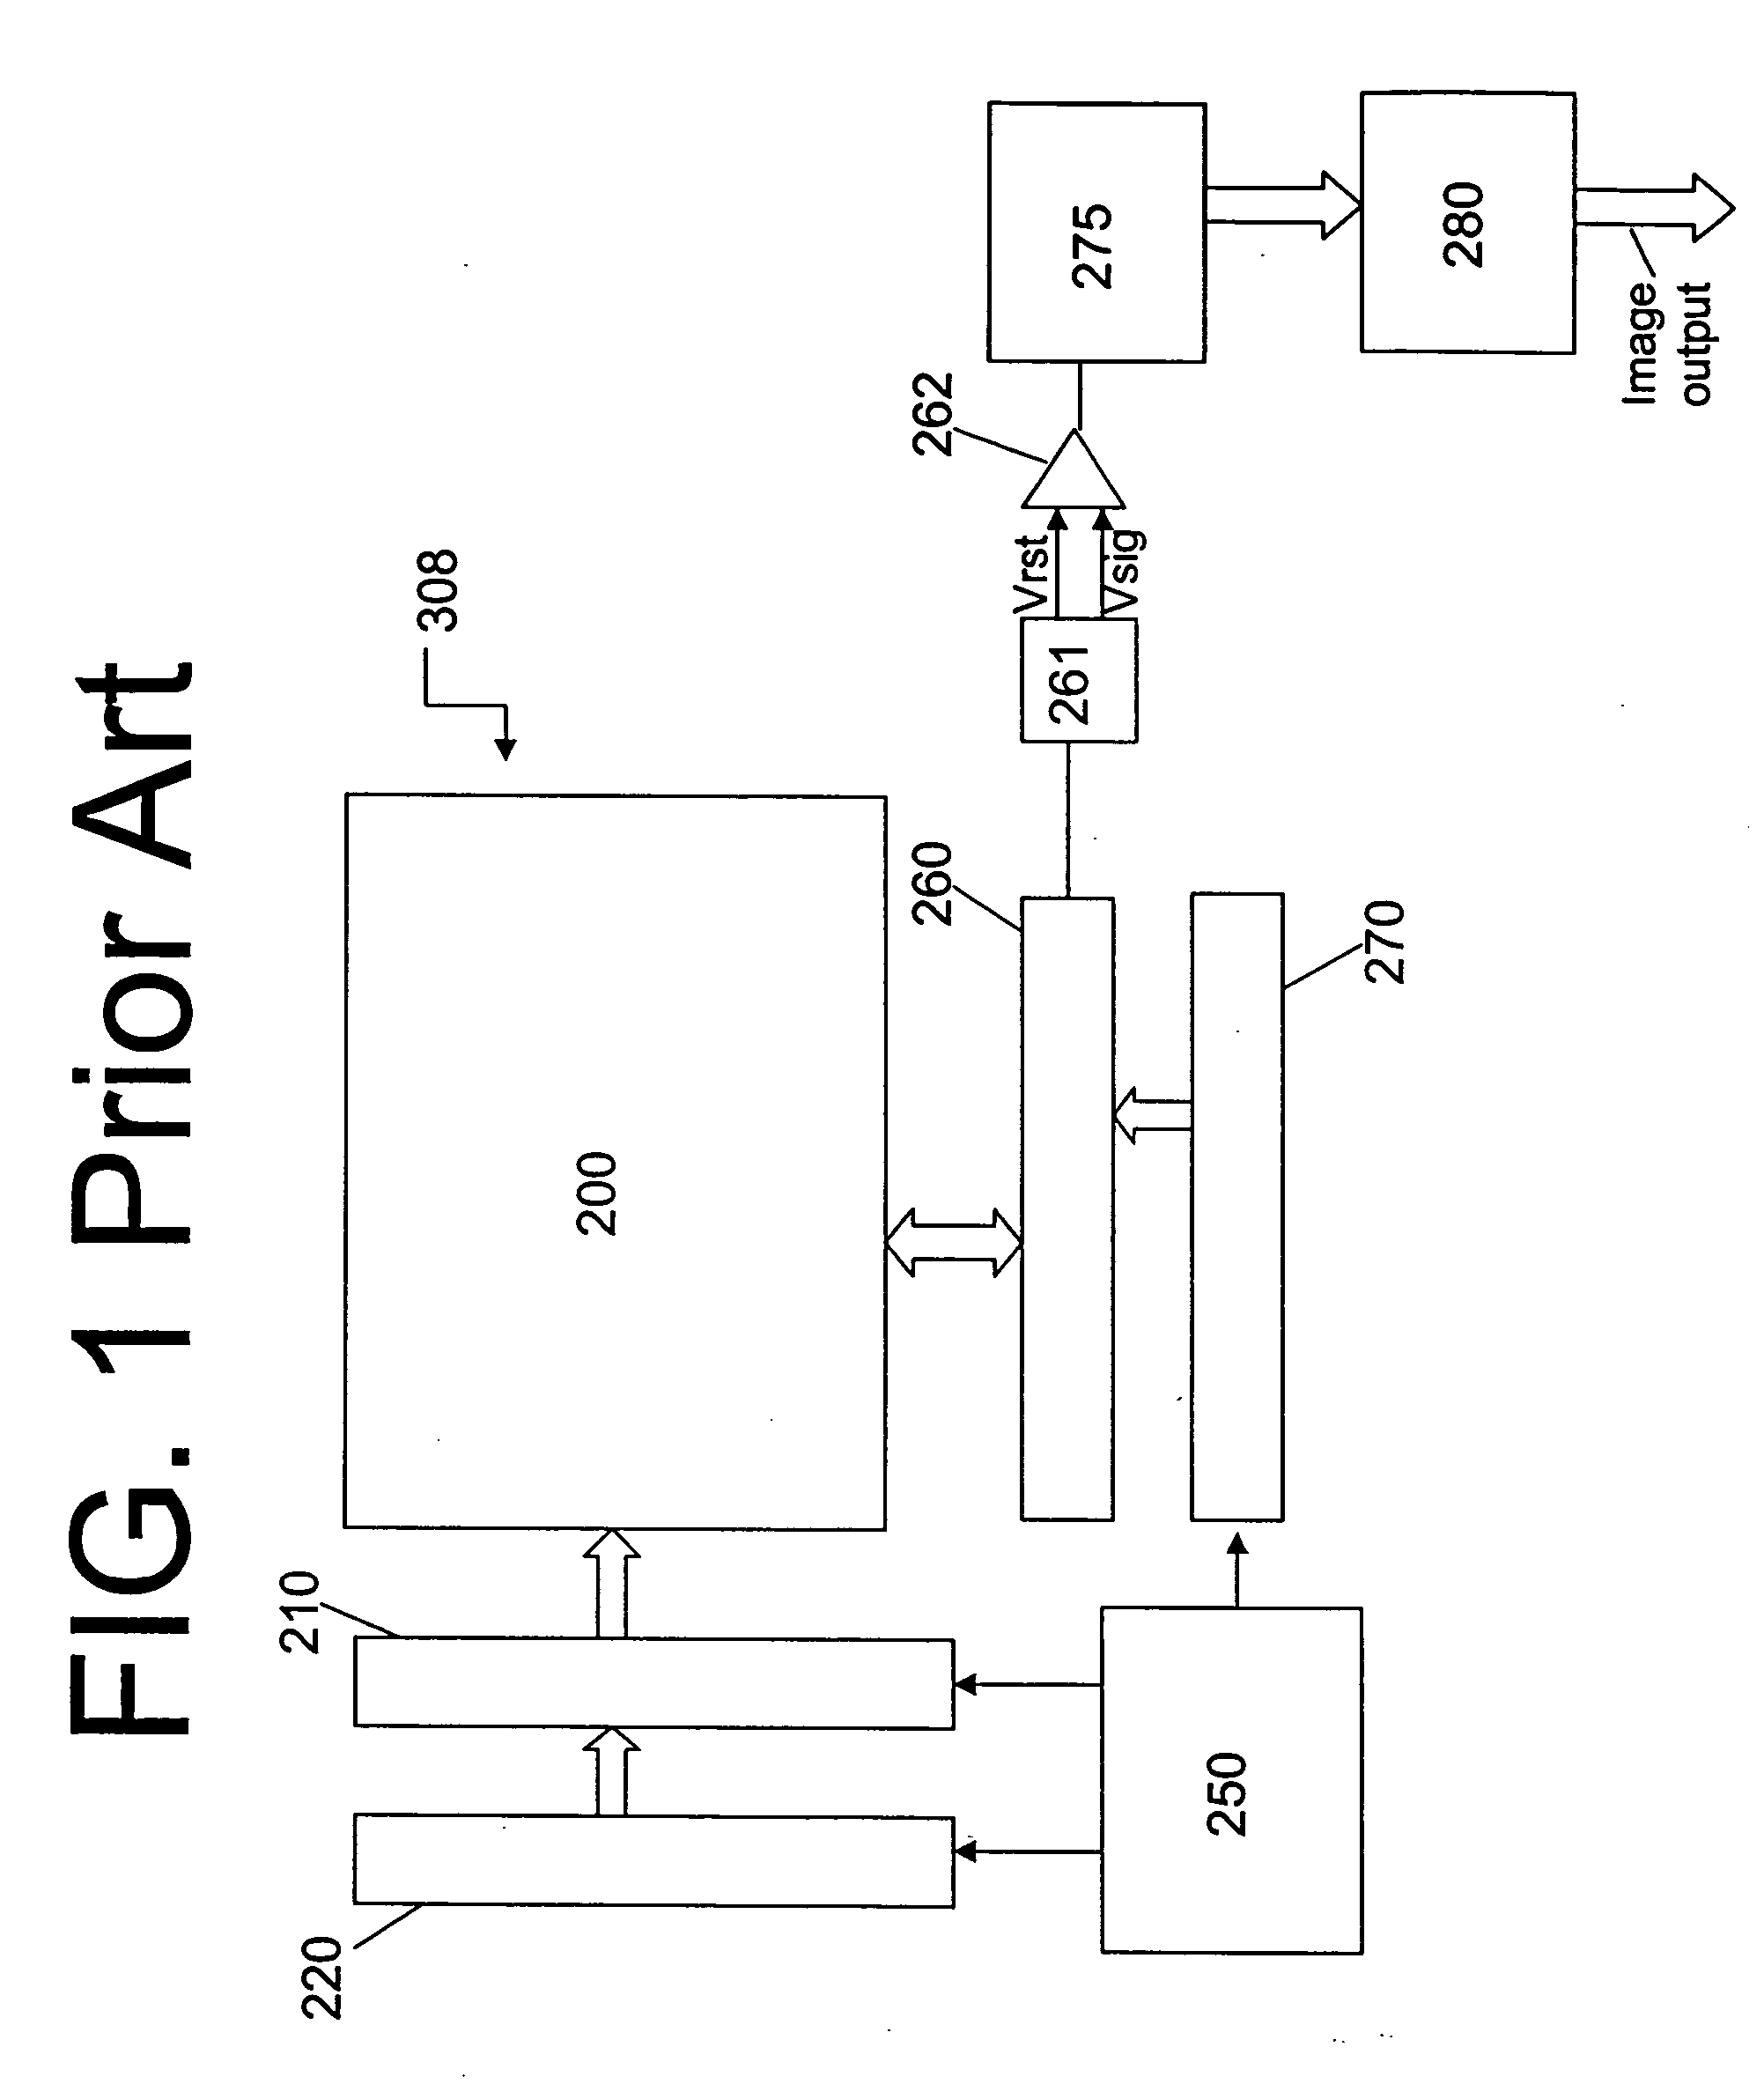 Method and apparatus for reducing imager floating diffusion leakage